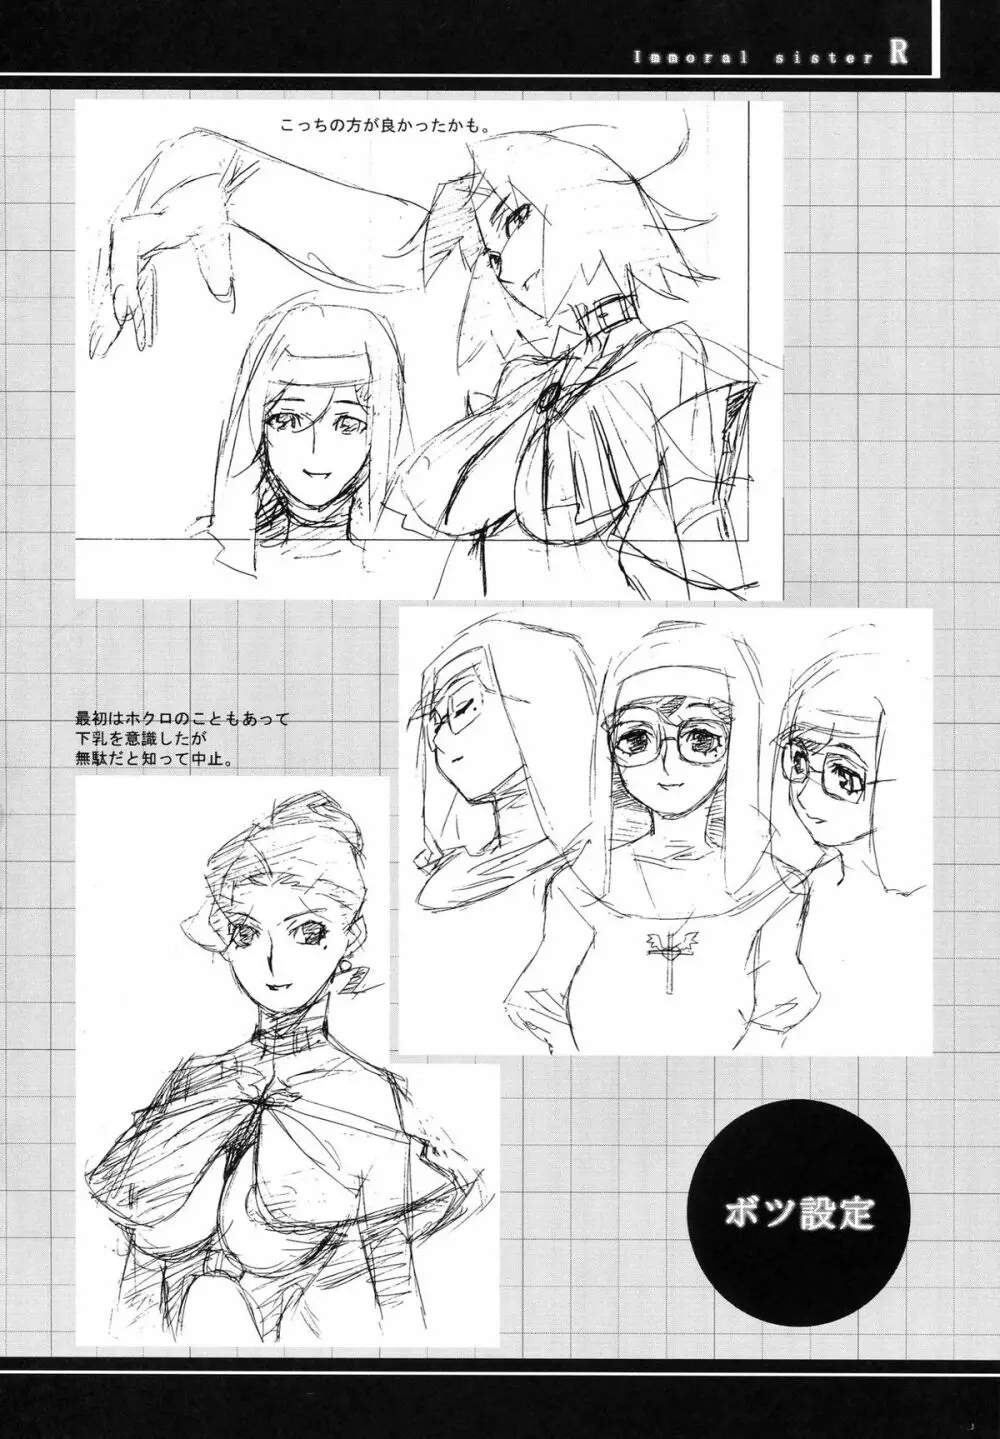 Immoral sister R 原画集 Page.54